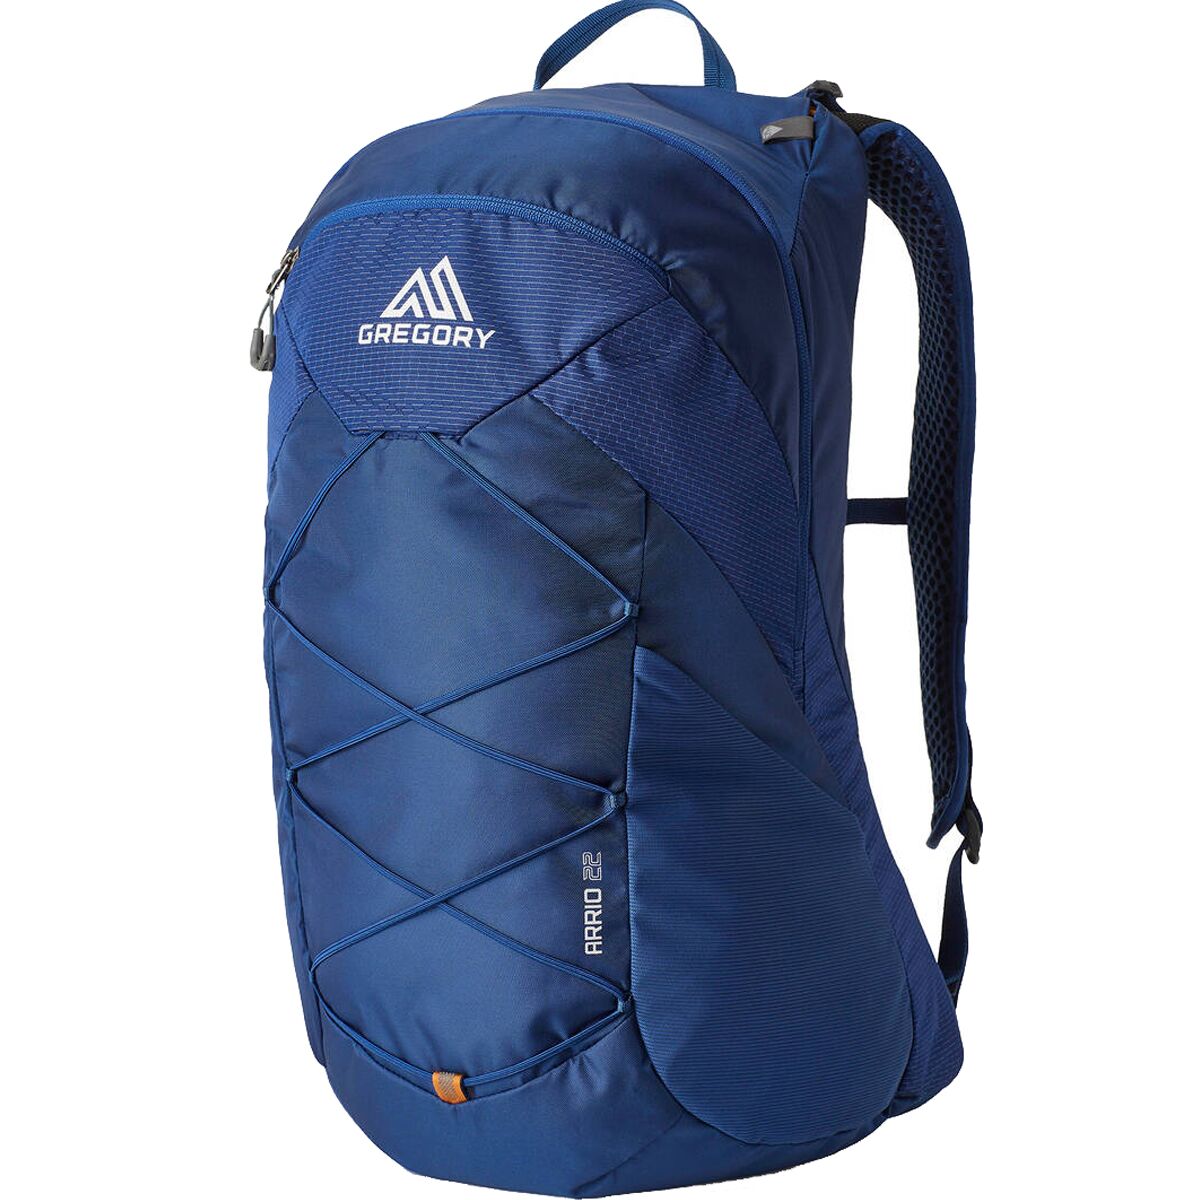 Photos - Backpack Gregory Arrio 22L  